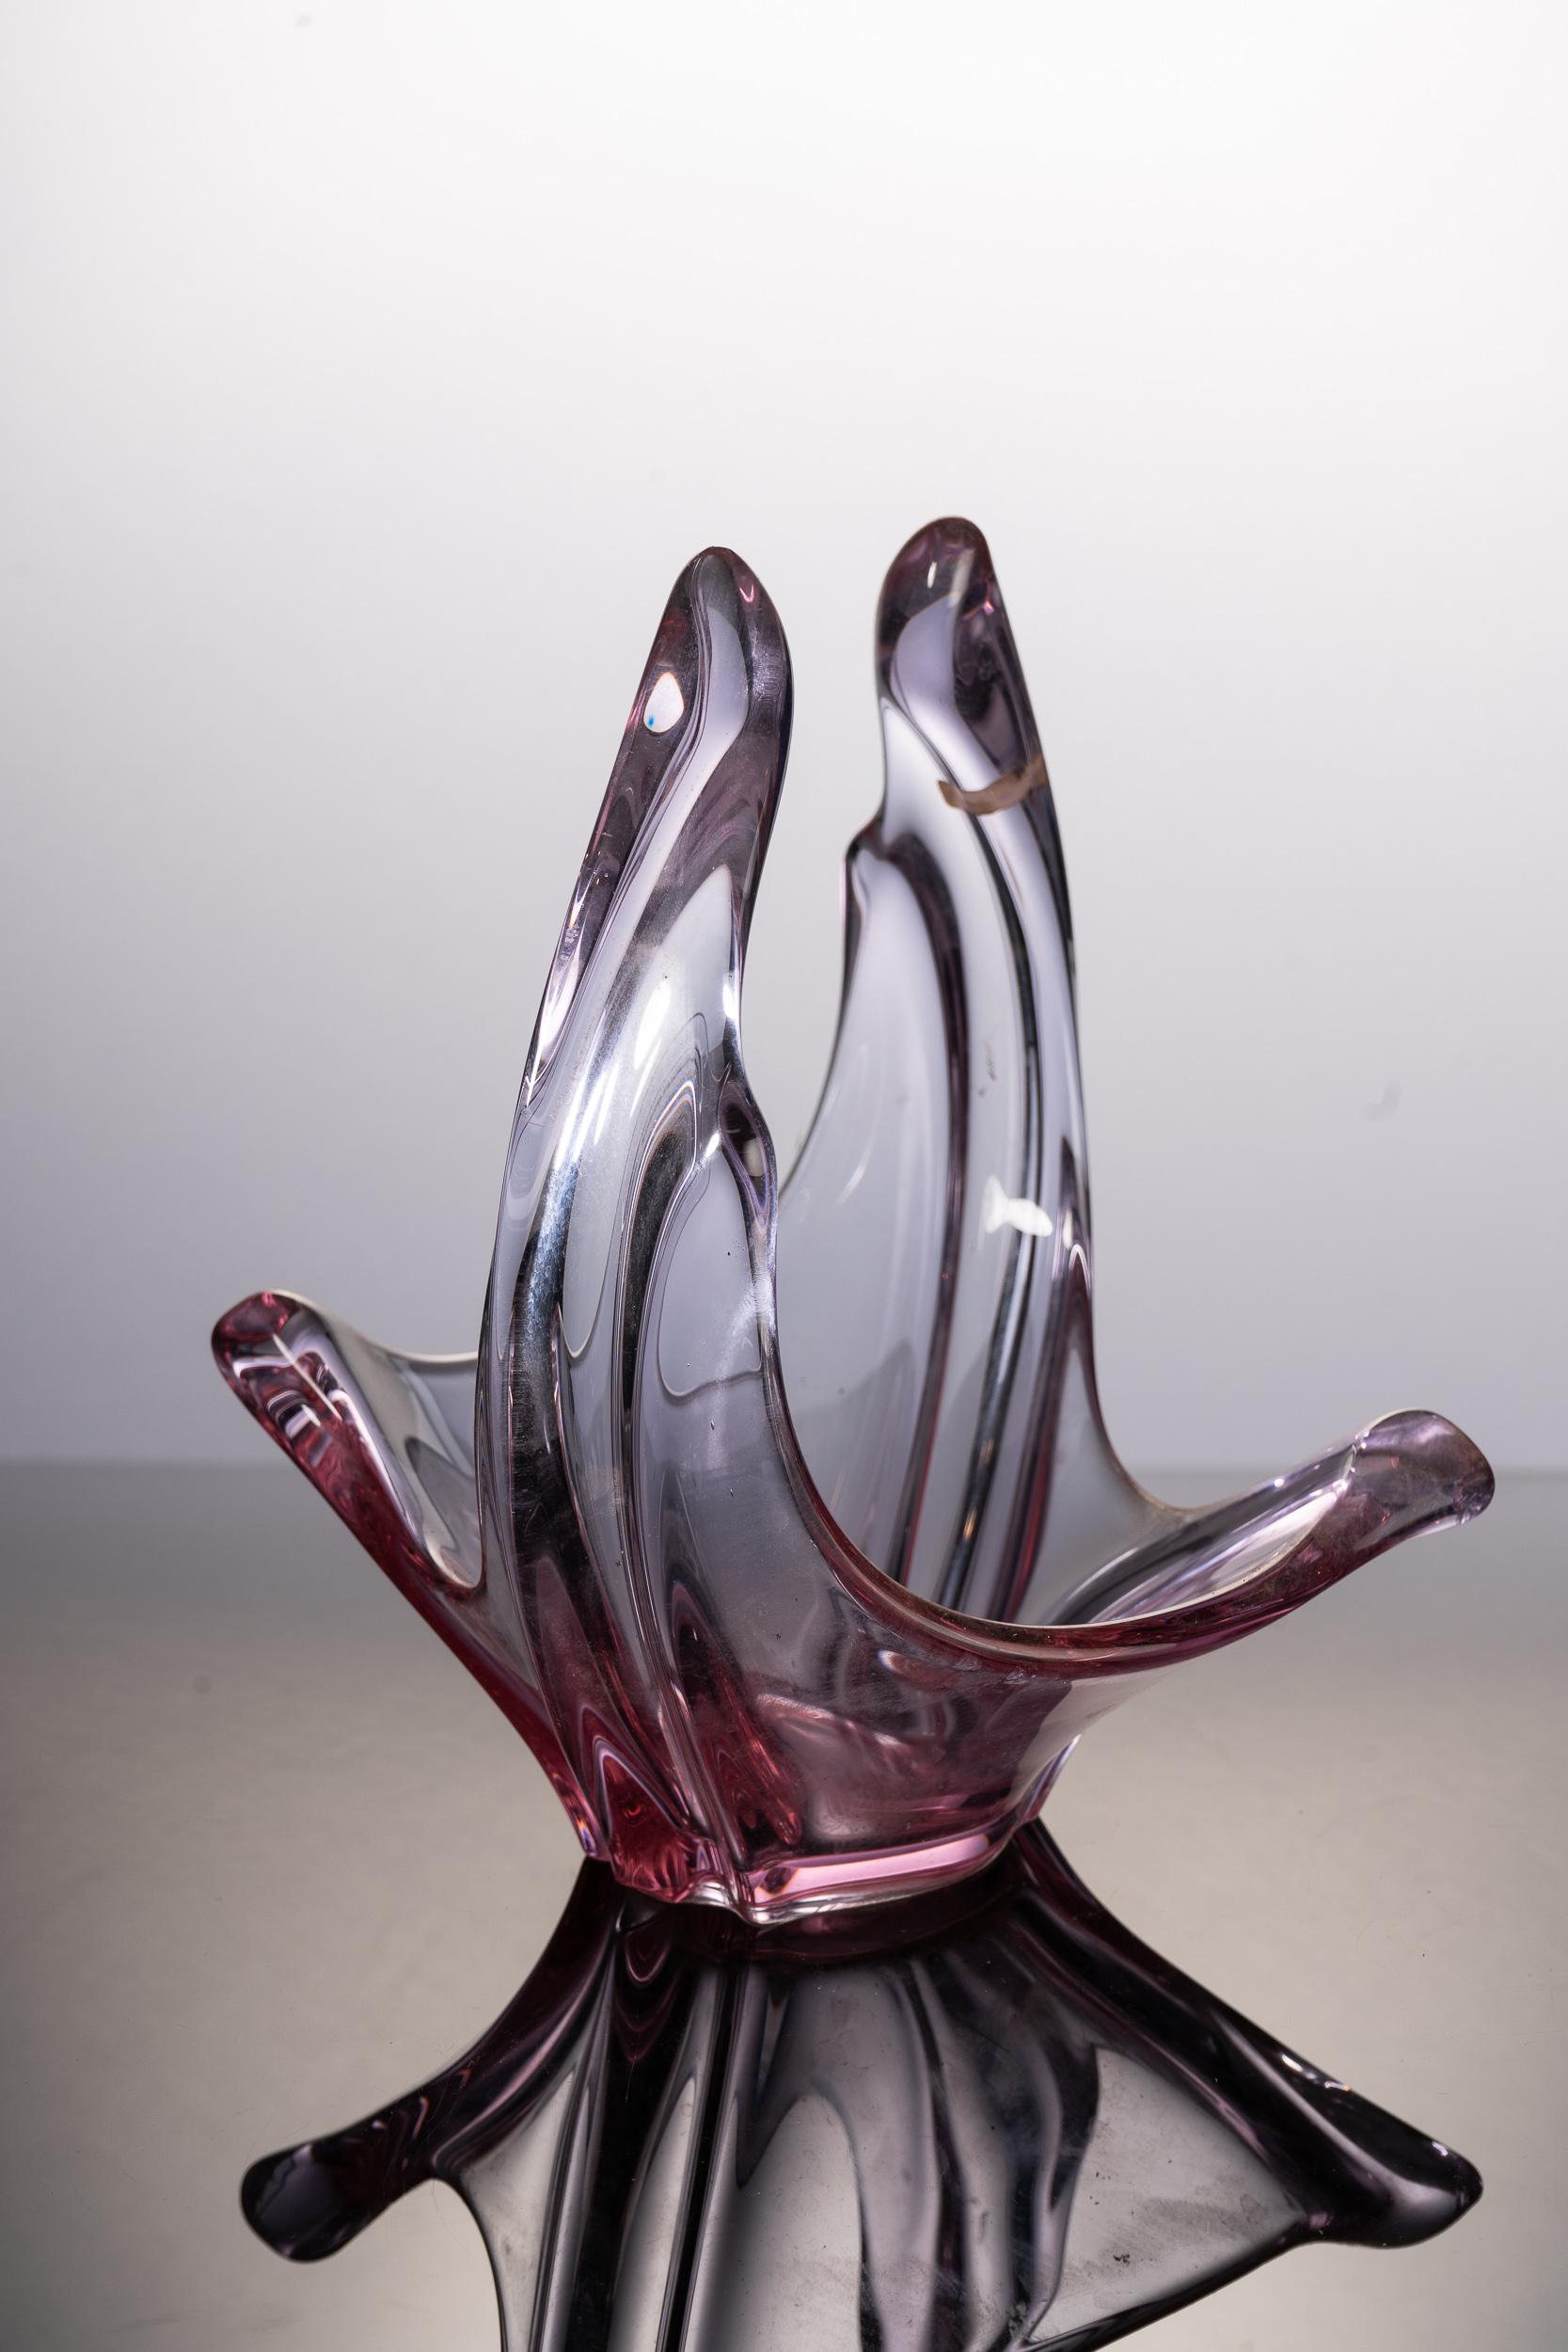 Stunning hand blown glass vase. This very decorative item with beautiful light purple and pink hues is an absolute feast for the eyes and is in perfect condition.